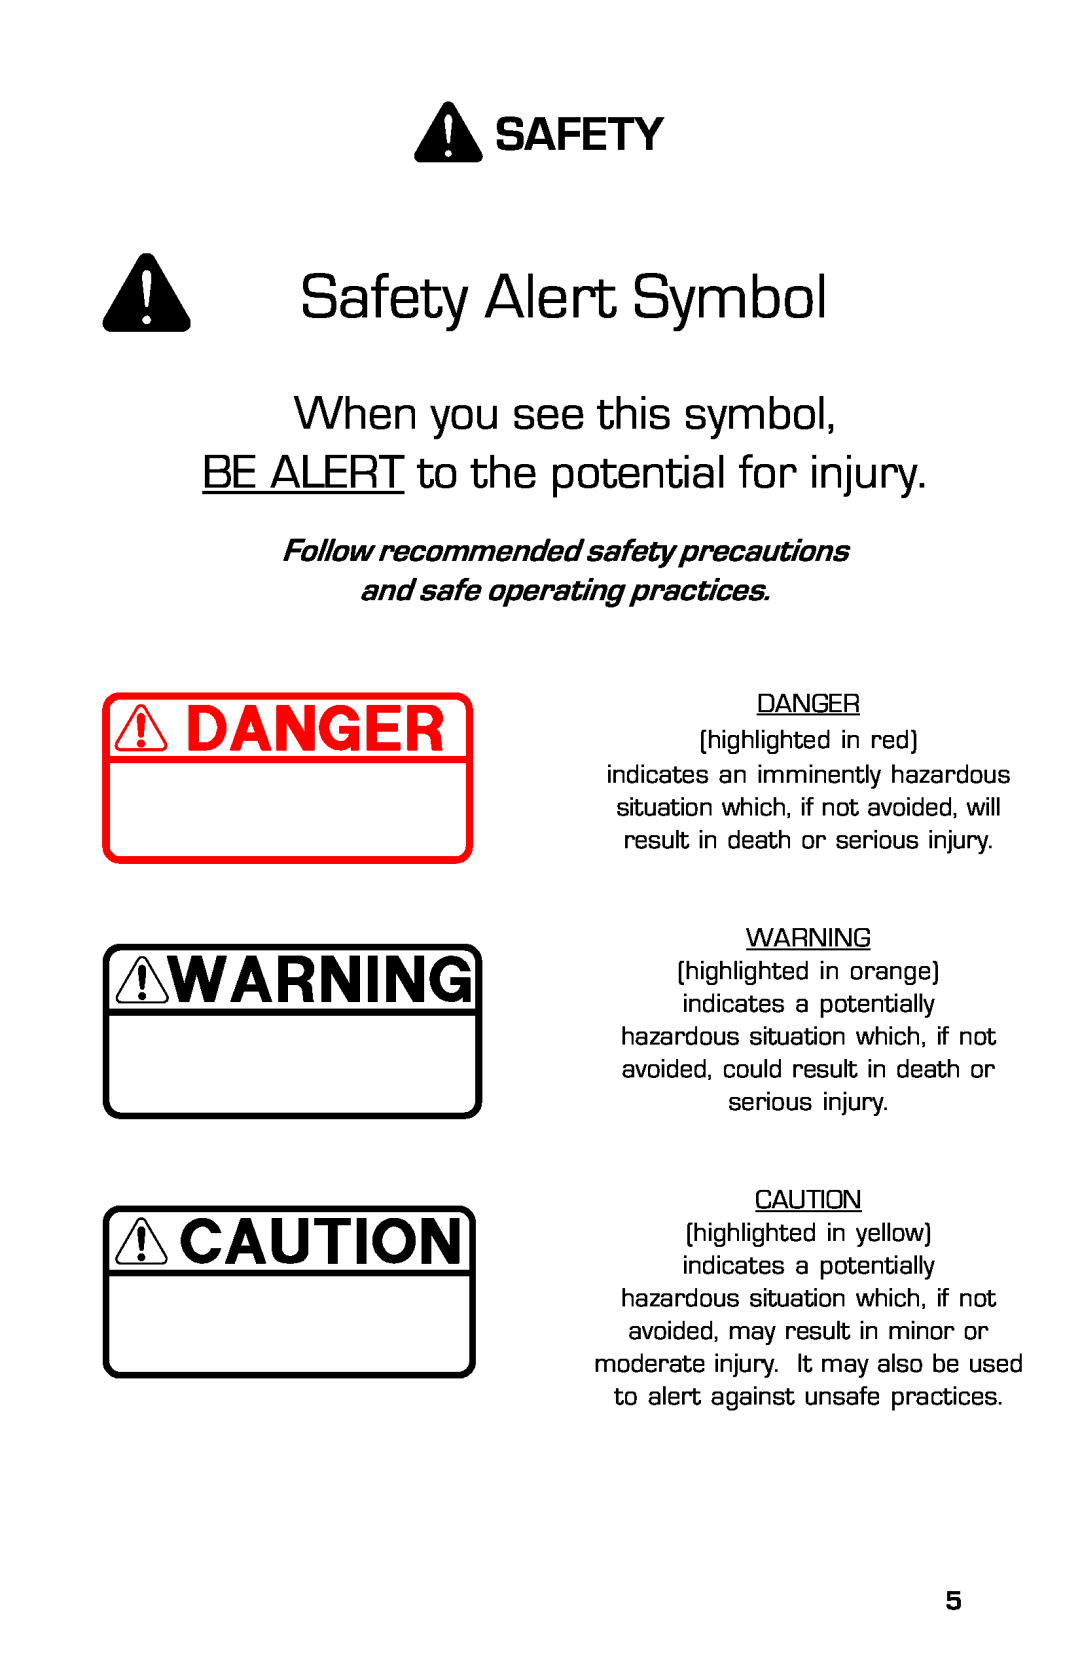 Dixon 13636-0702, ZTR 7525 manual When you see this symbol BE ALERT to the potential for injury, Safety Alert Symbol 